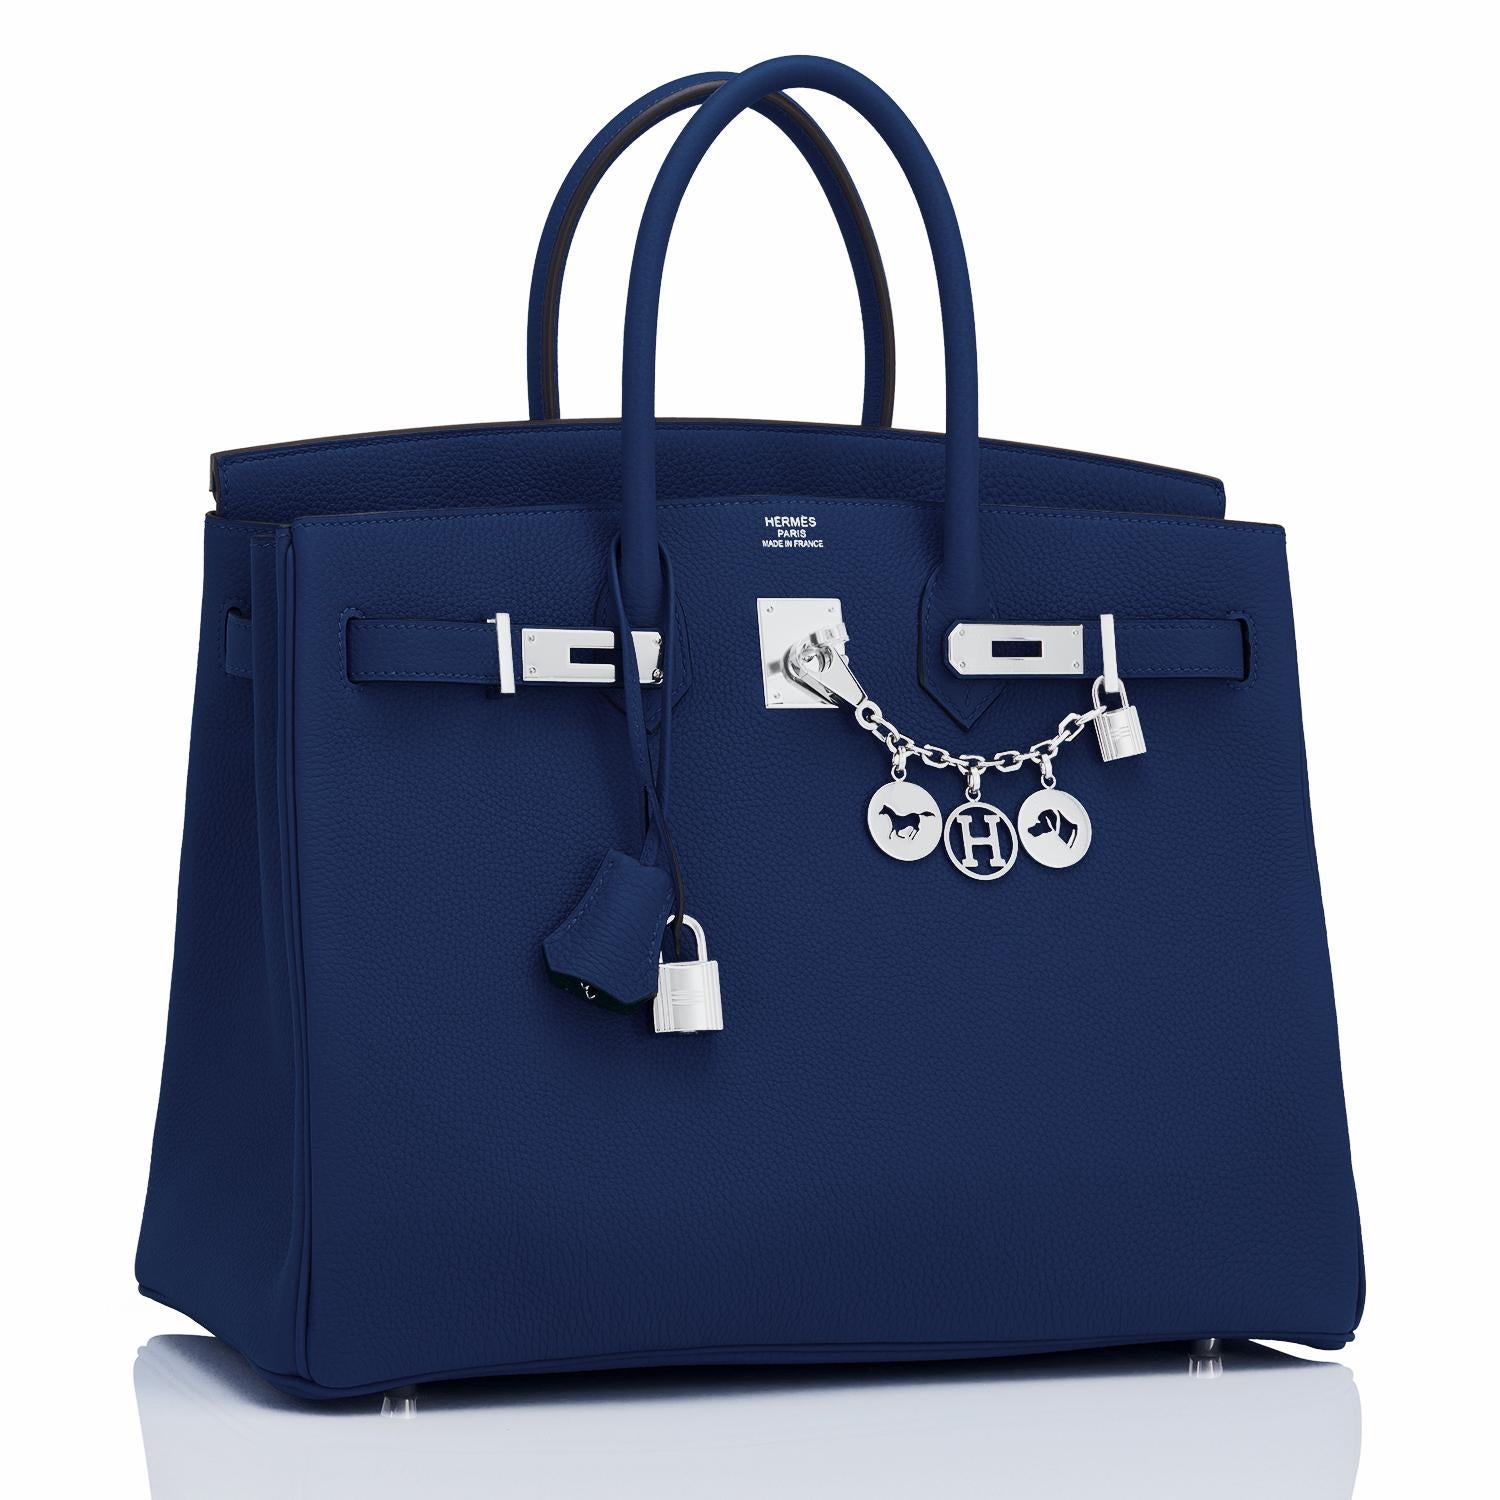 Hermes Birkin 35cm Blue Nuit Navy Togo Palladium Birkin Bag Y Stamp, 2020
The perfect navy Birkin 35cm has arrived for spring summer!
Just purchased from Hermes store; bag bears new 2020 interior Y Stamp 
Brand New in Box. Store fresh. Pristine